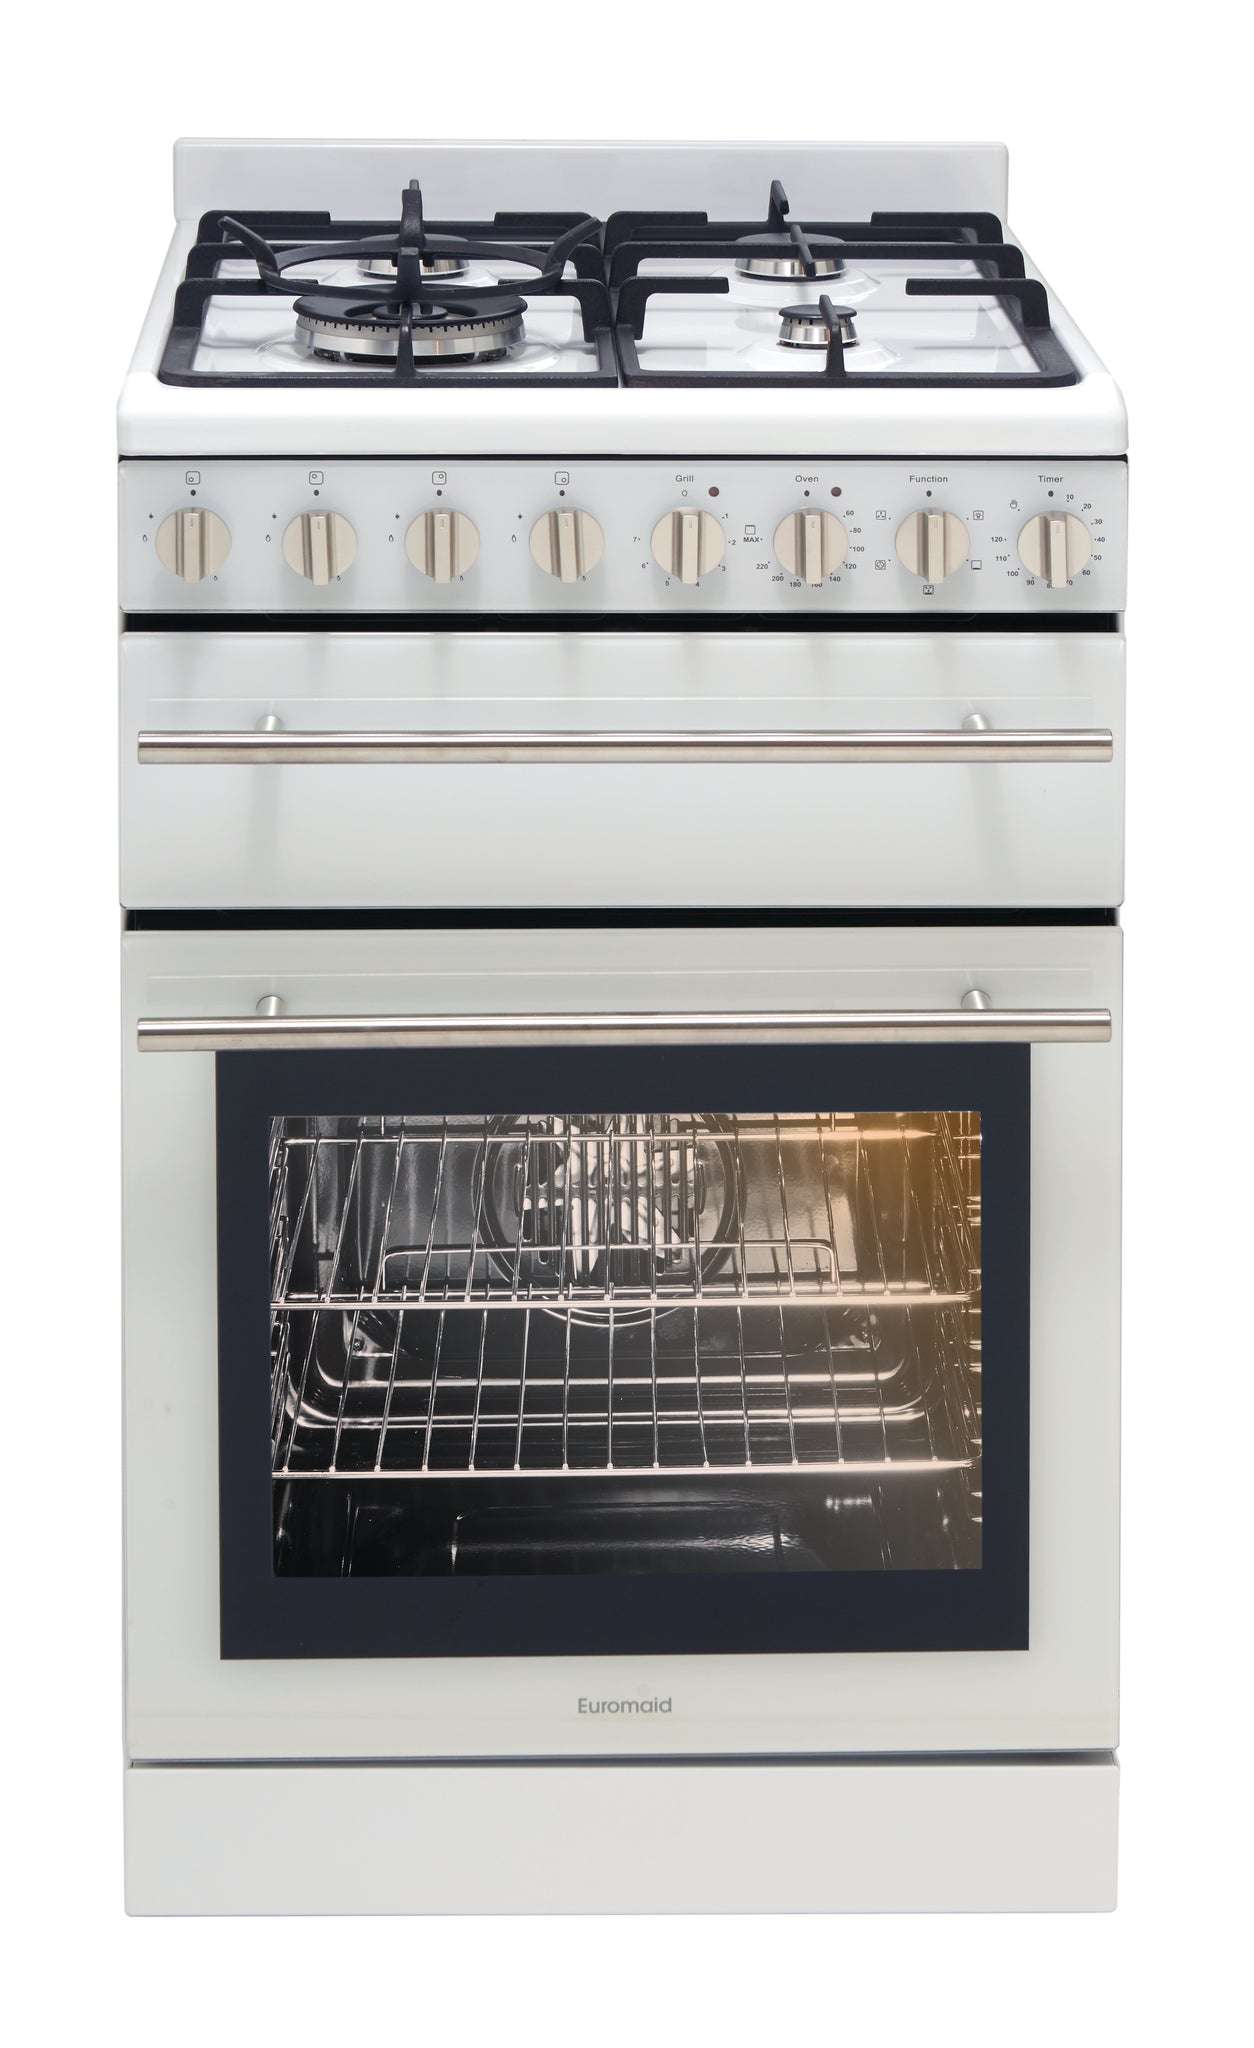 Euromaid 54cm Electric Oven with Gas Cooktop Dual Fuel - White Model F54GW